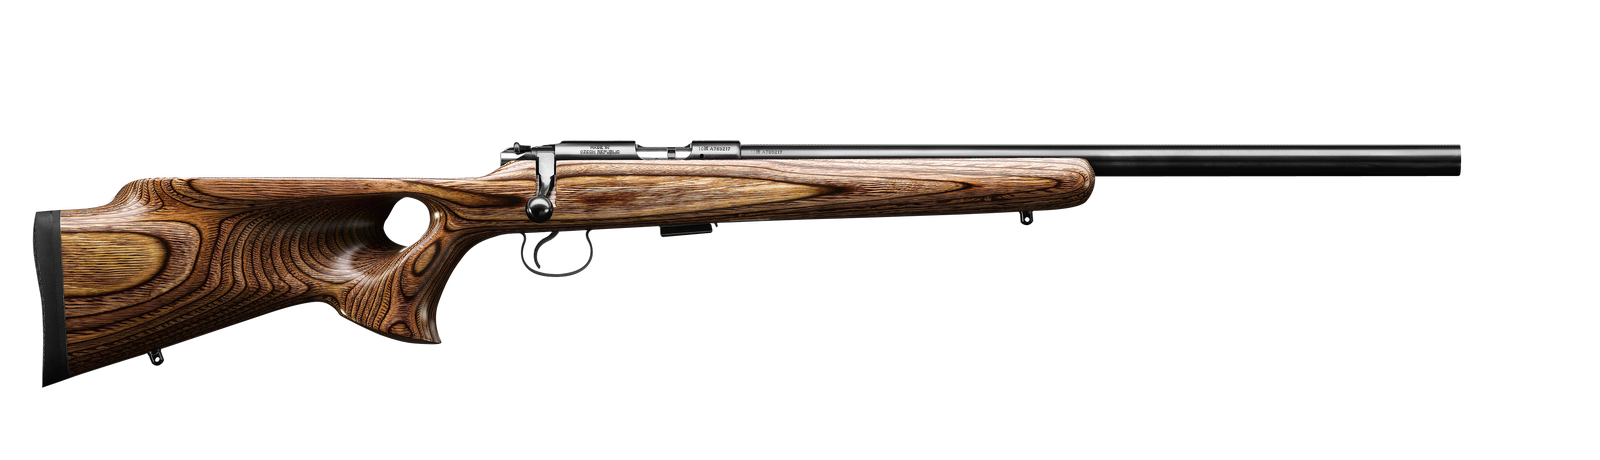 CZ 455 Thumbhole rifle in .17 HMR and more - My, Rifle, Sniper rifle, Refinement, Tuning, Longpost